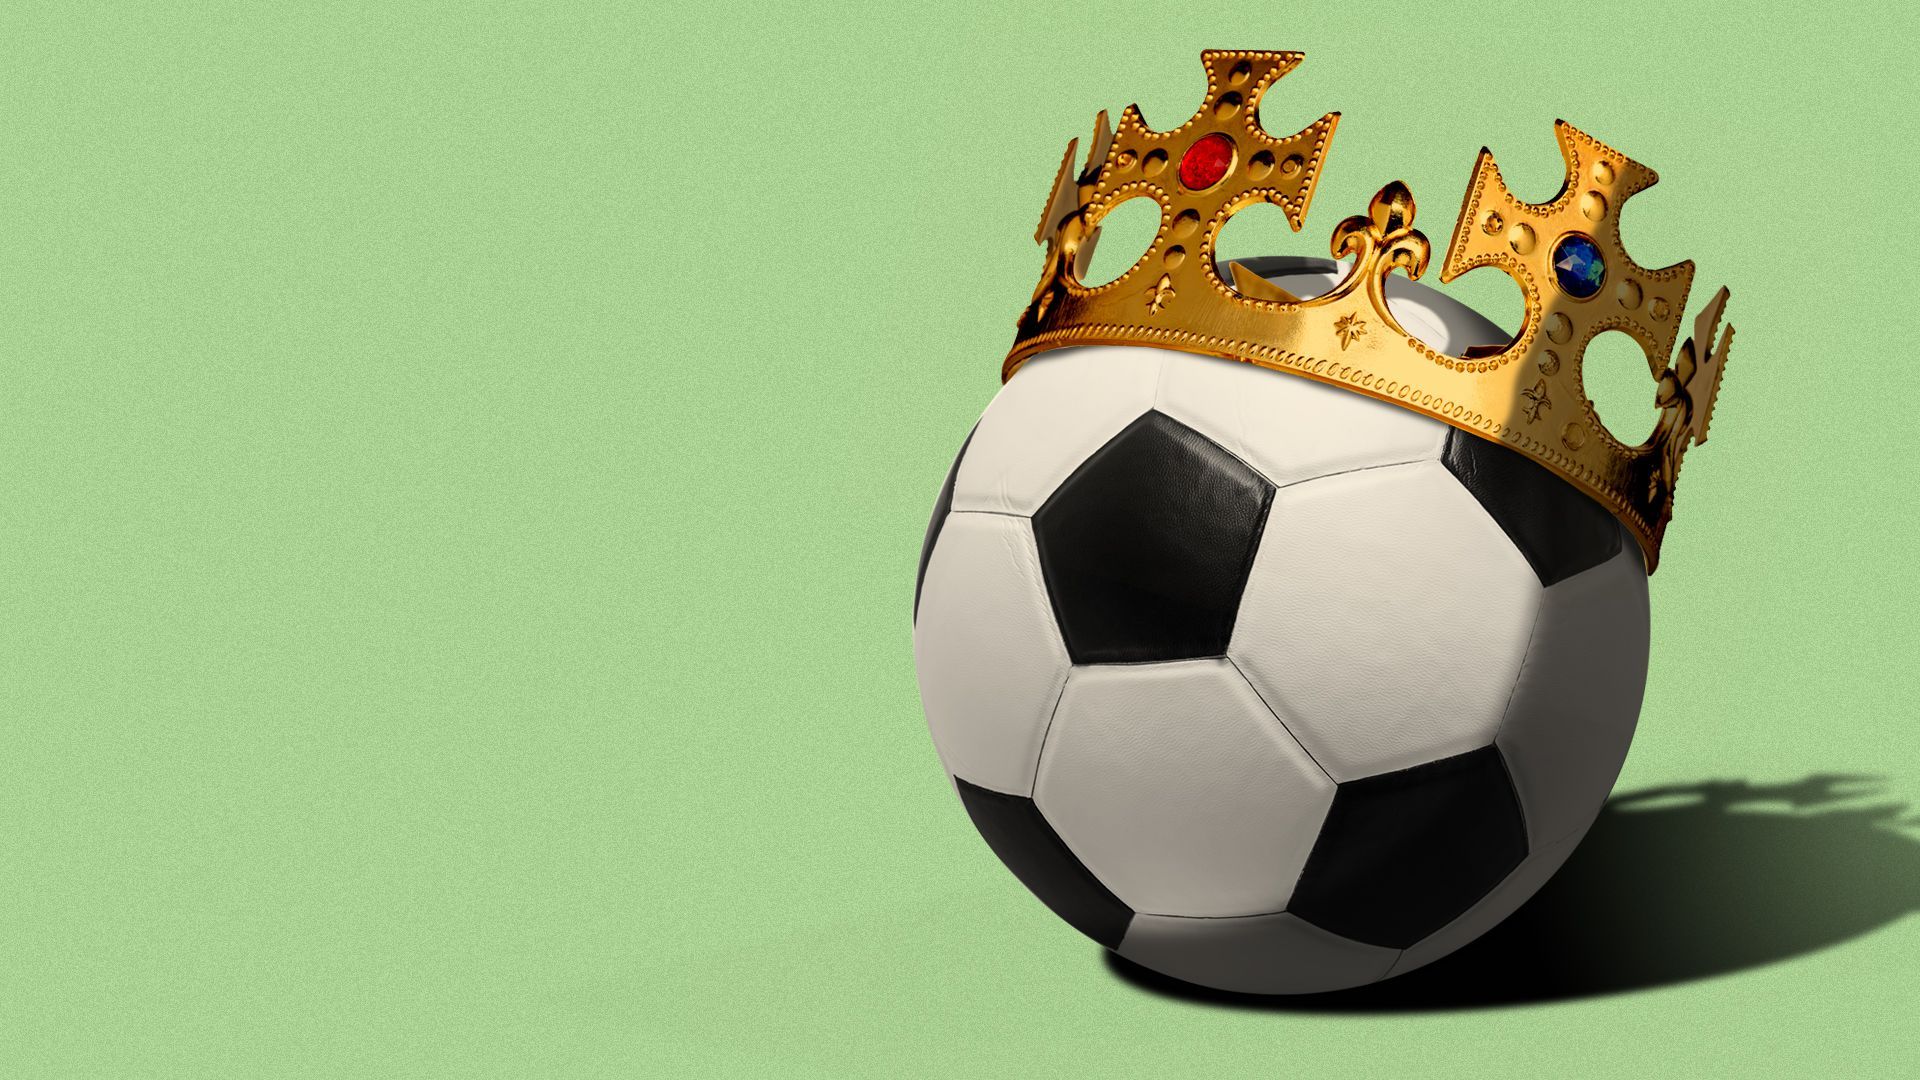 Illustration of a soccer ball wearing a crown